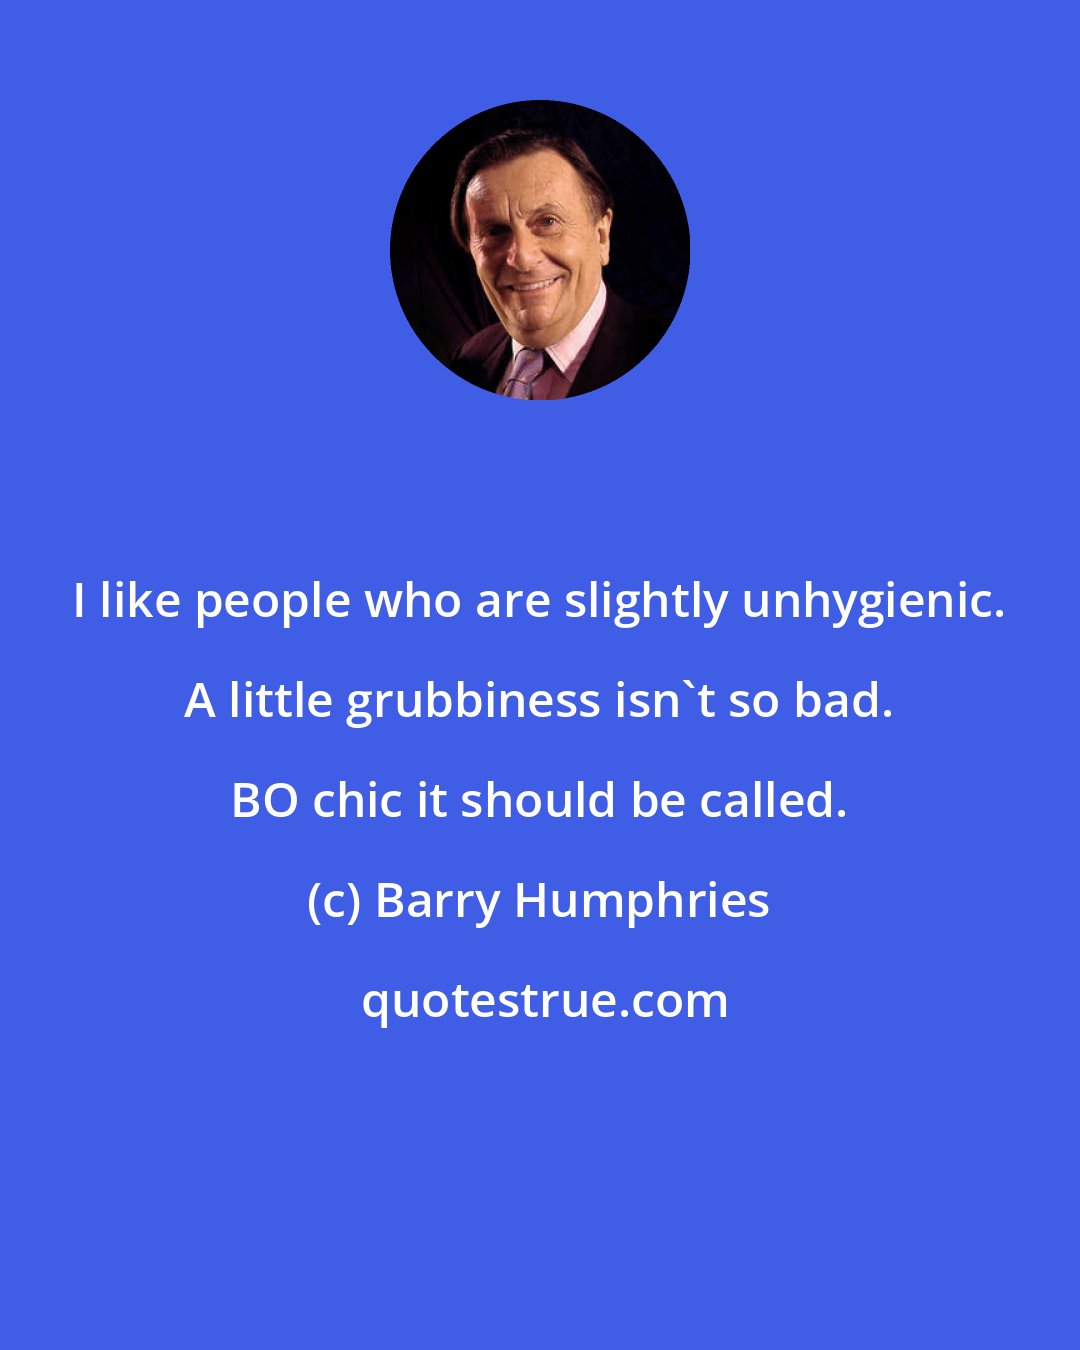 Barry Humphries: I like people who are slightly unhygienic. A little grubbiness isn't so bad. BO chic it should be called.